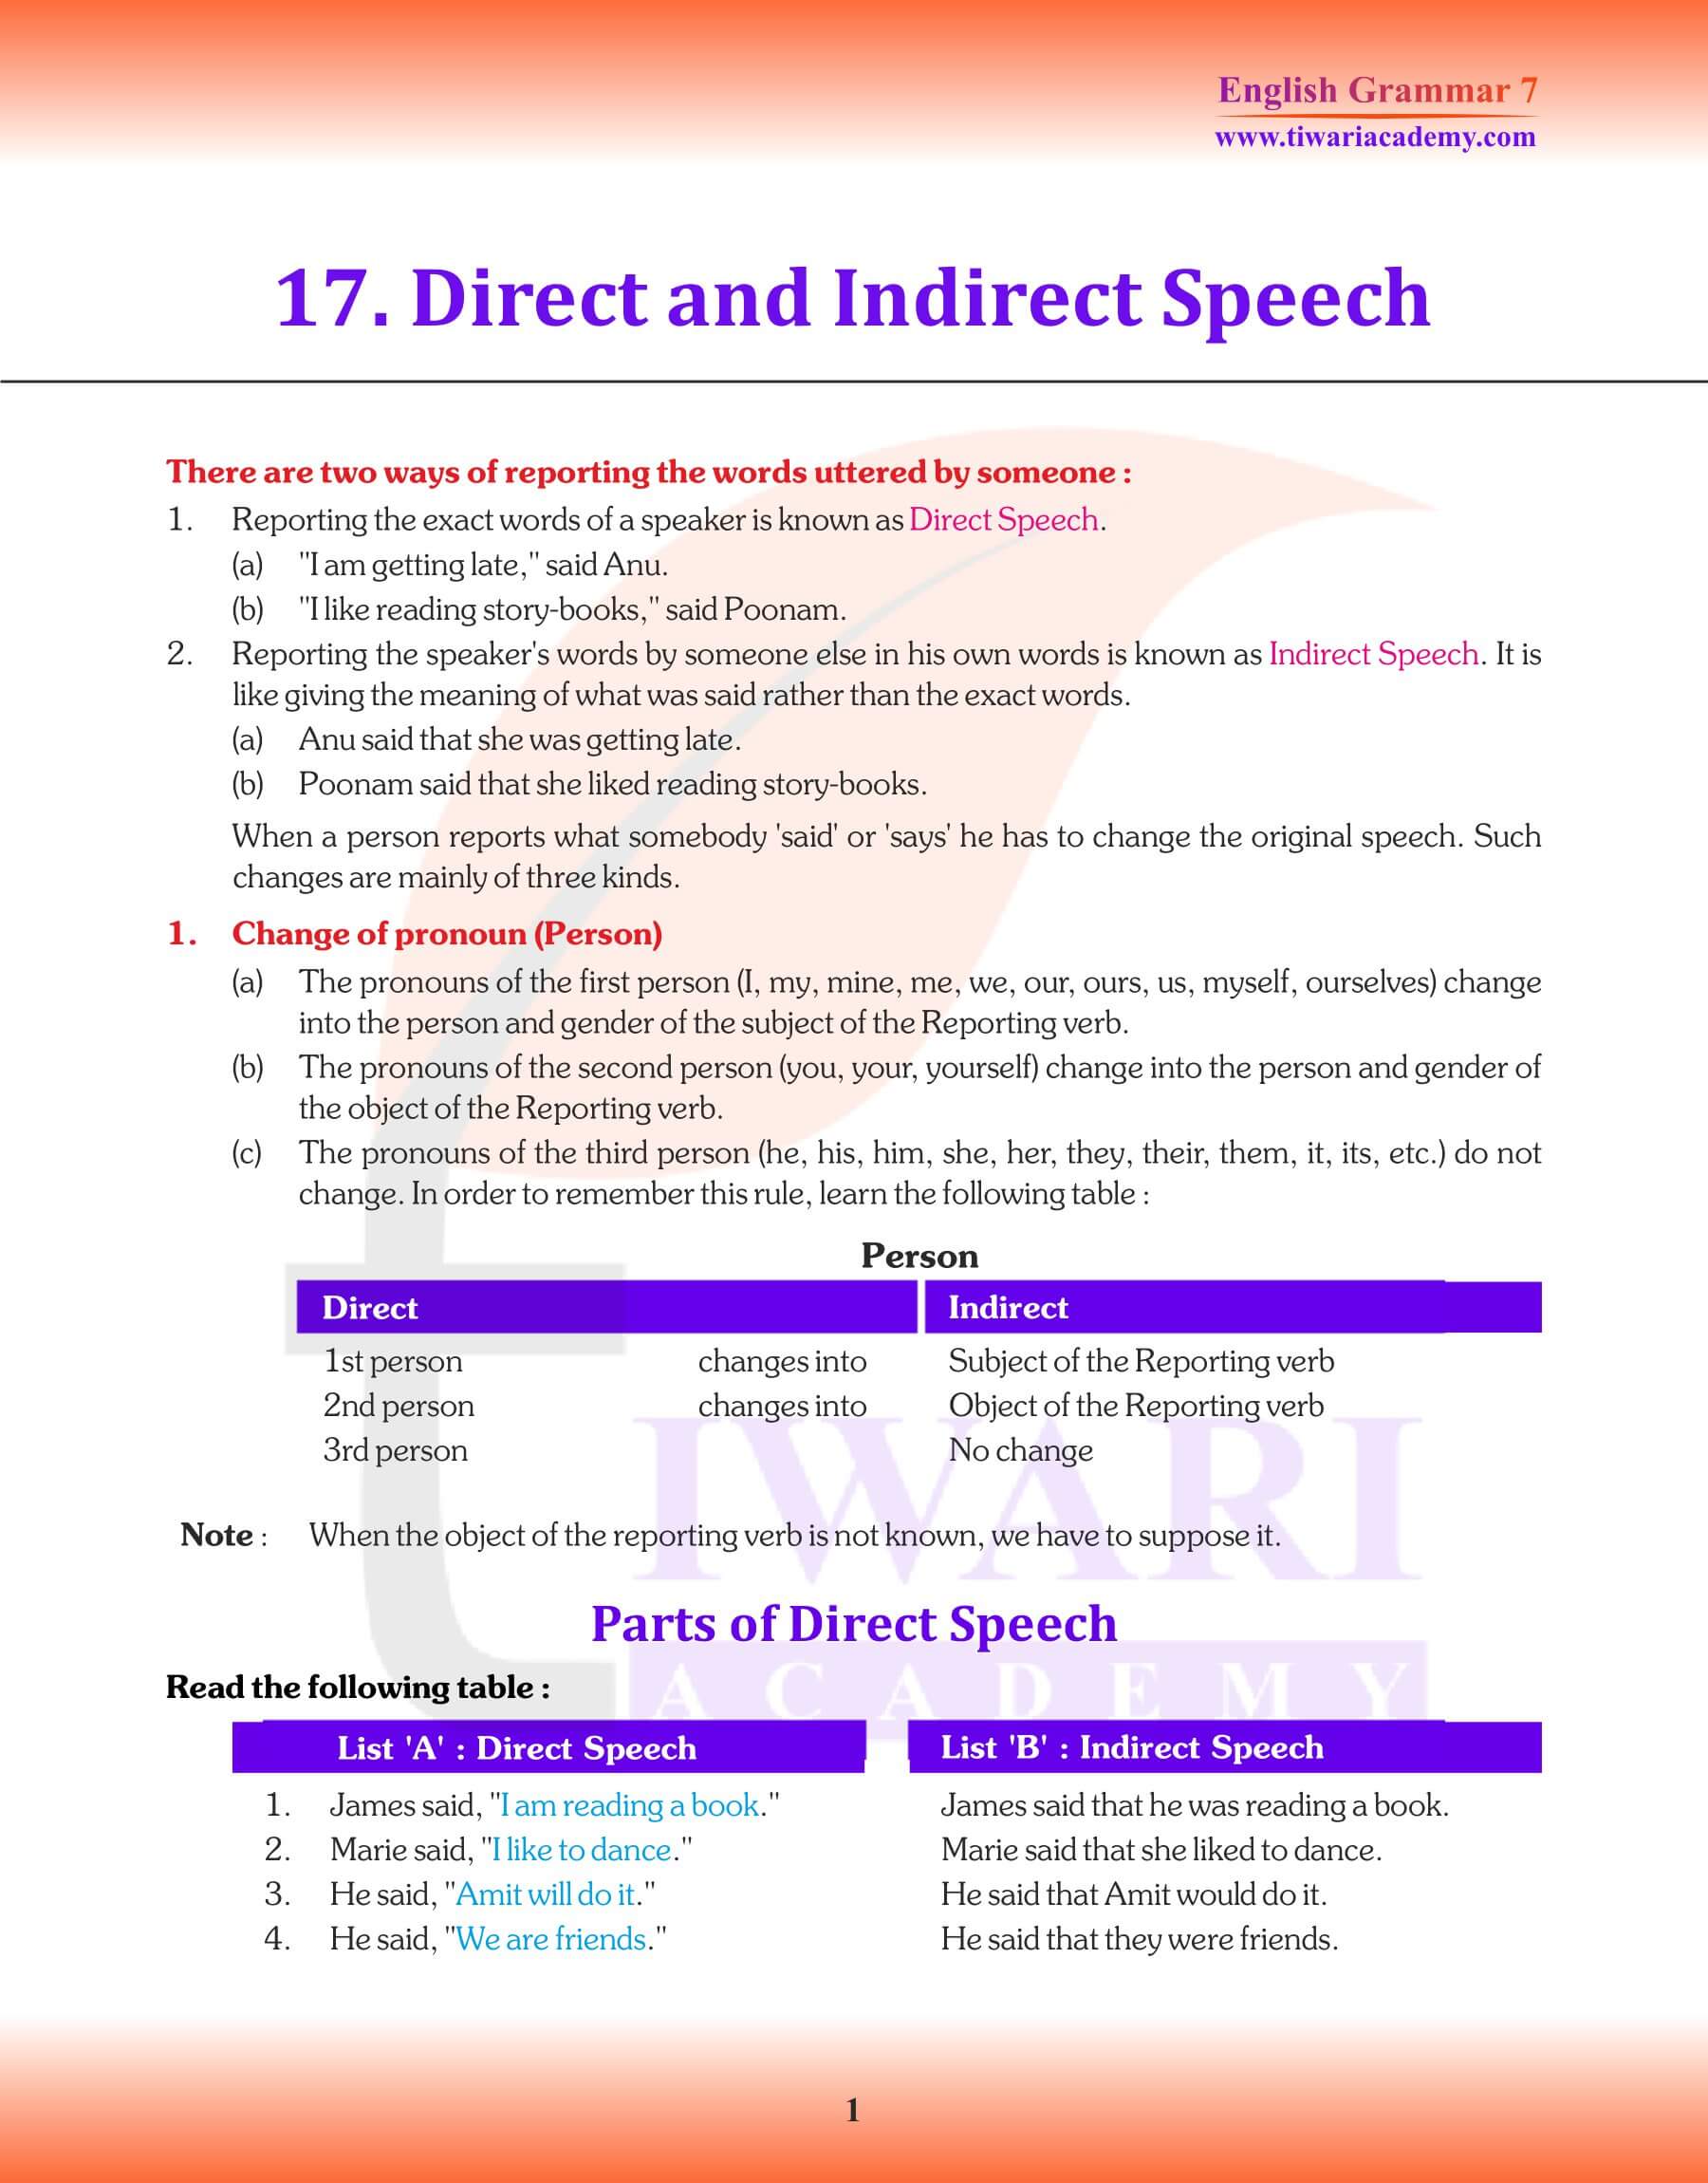 Class 7 English Grammar Chapter 17 Revision Book